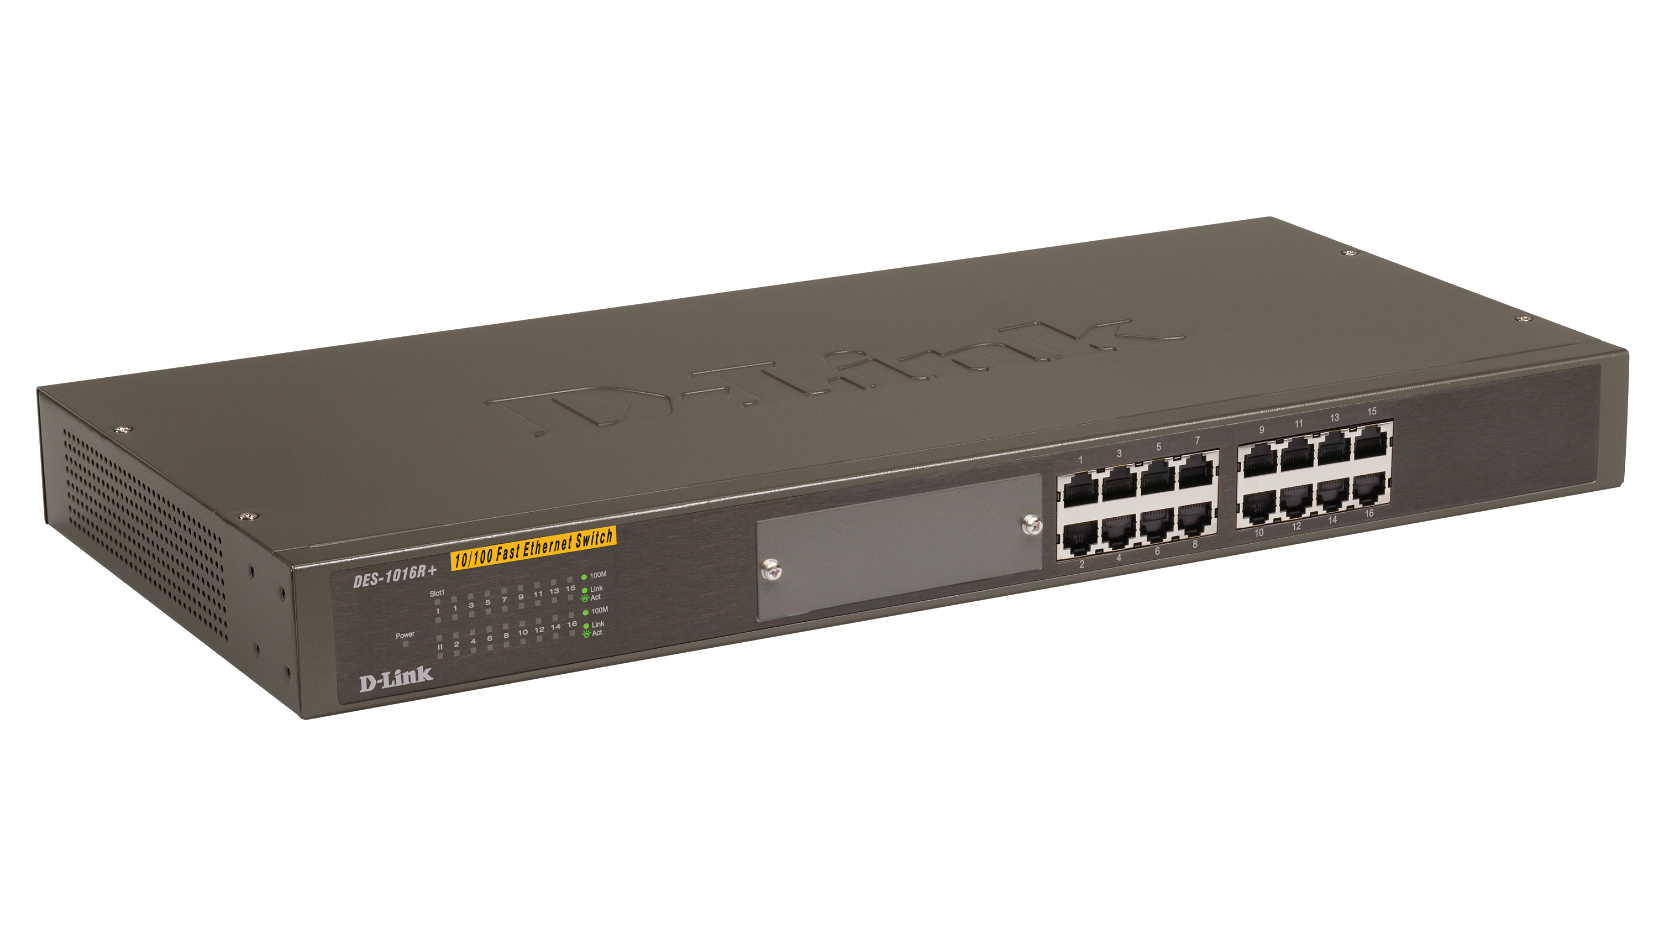 DES-1016R+ 16-Port Fast Ethernet Unmanaged Switch With Open Slot 